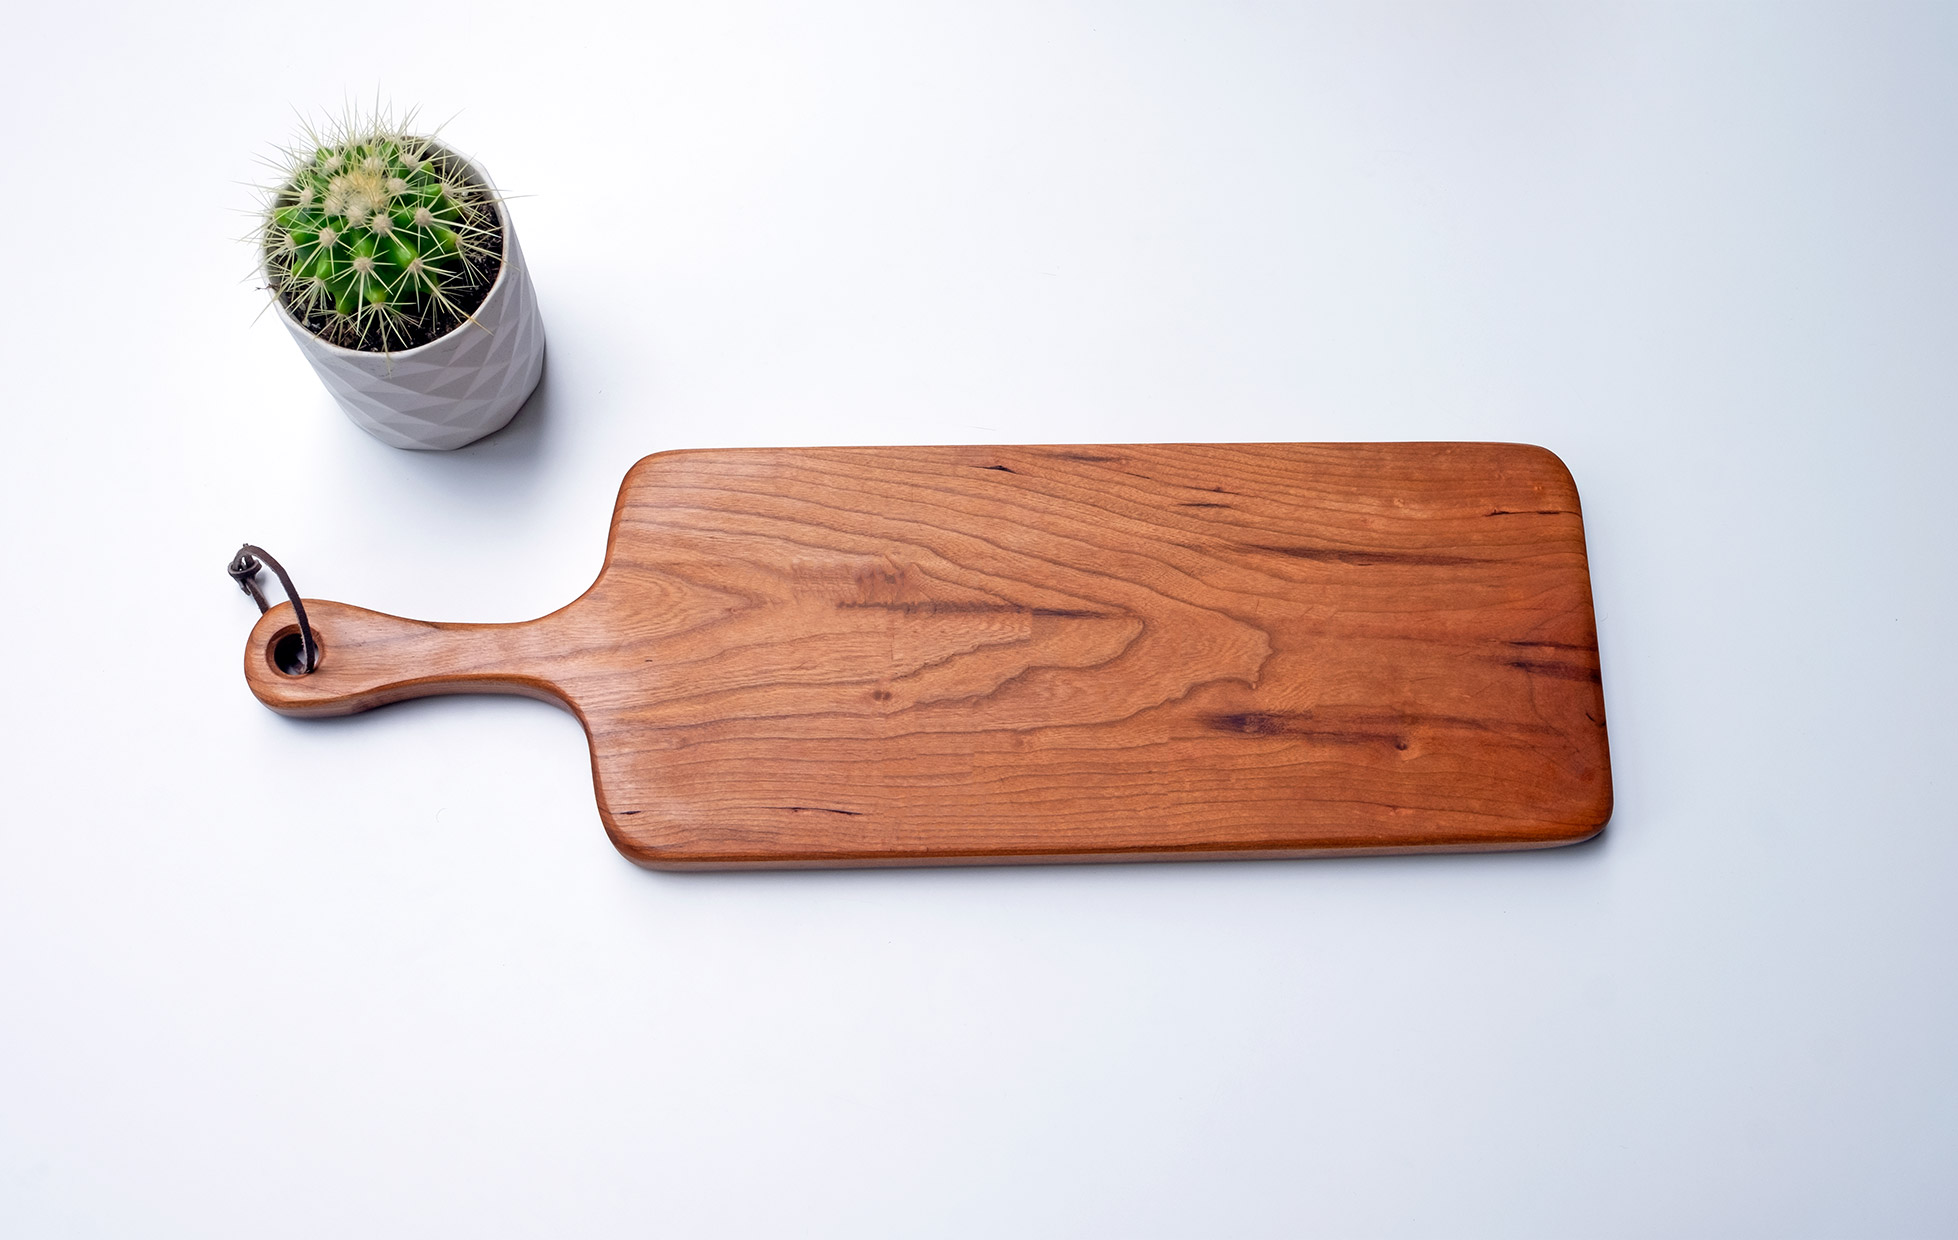 Black Cherry board for serving food.